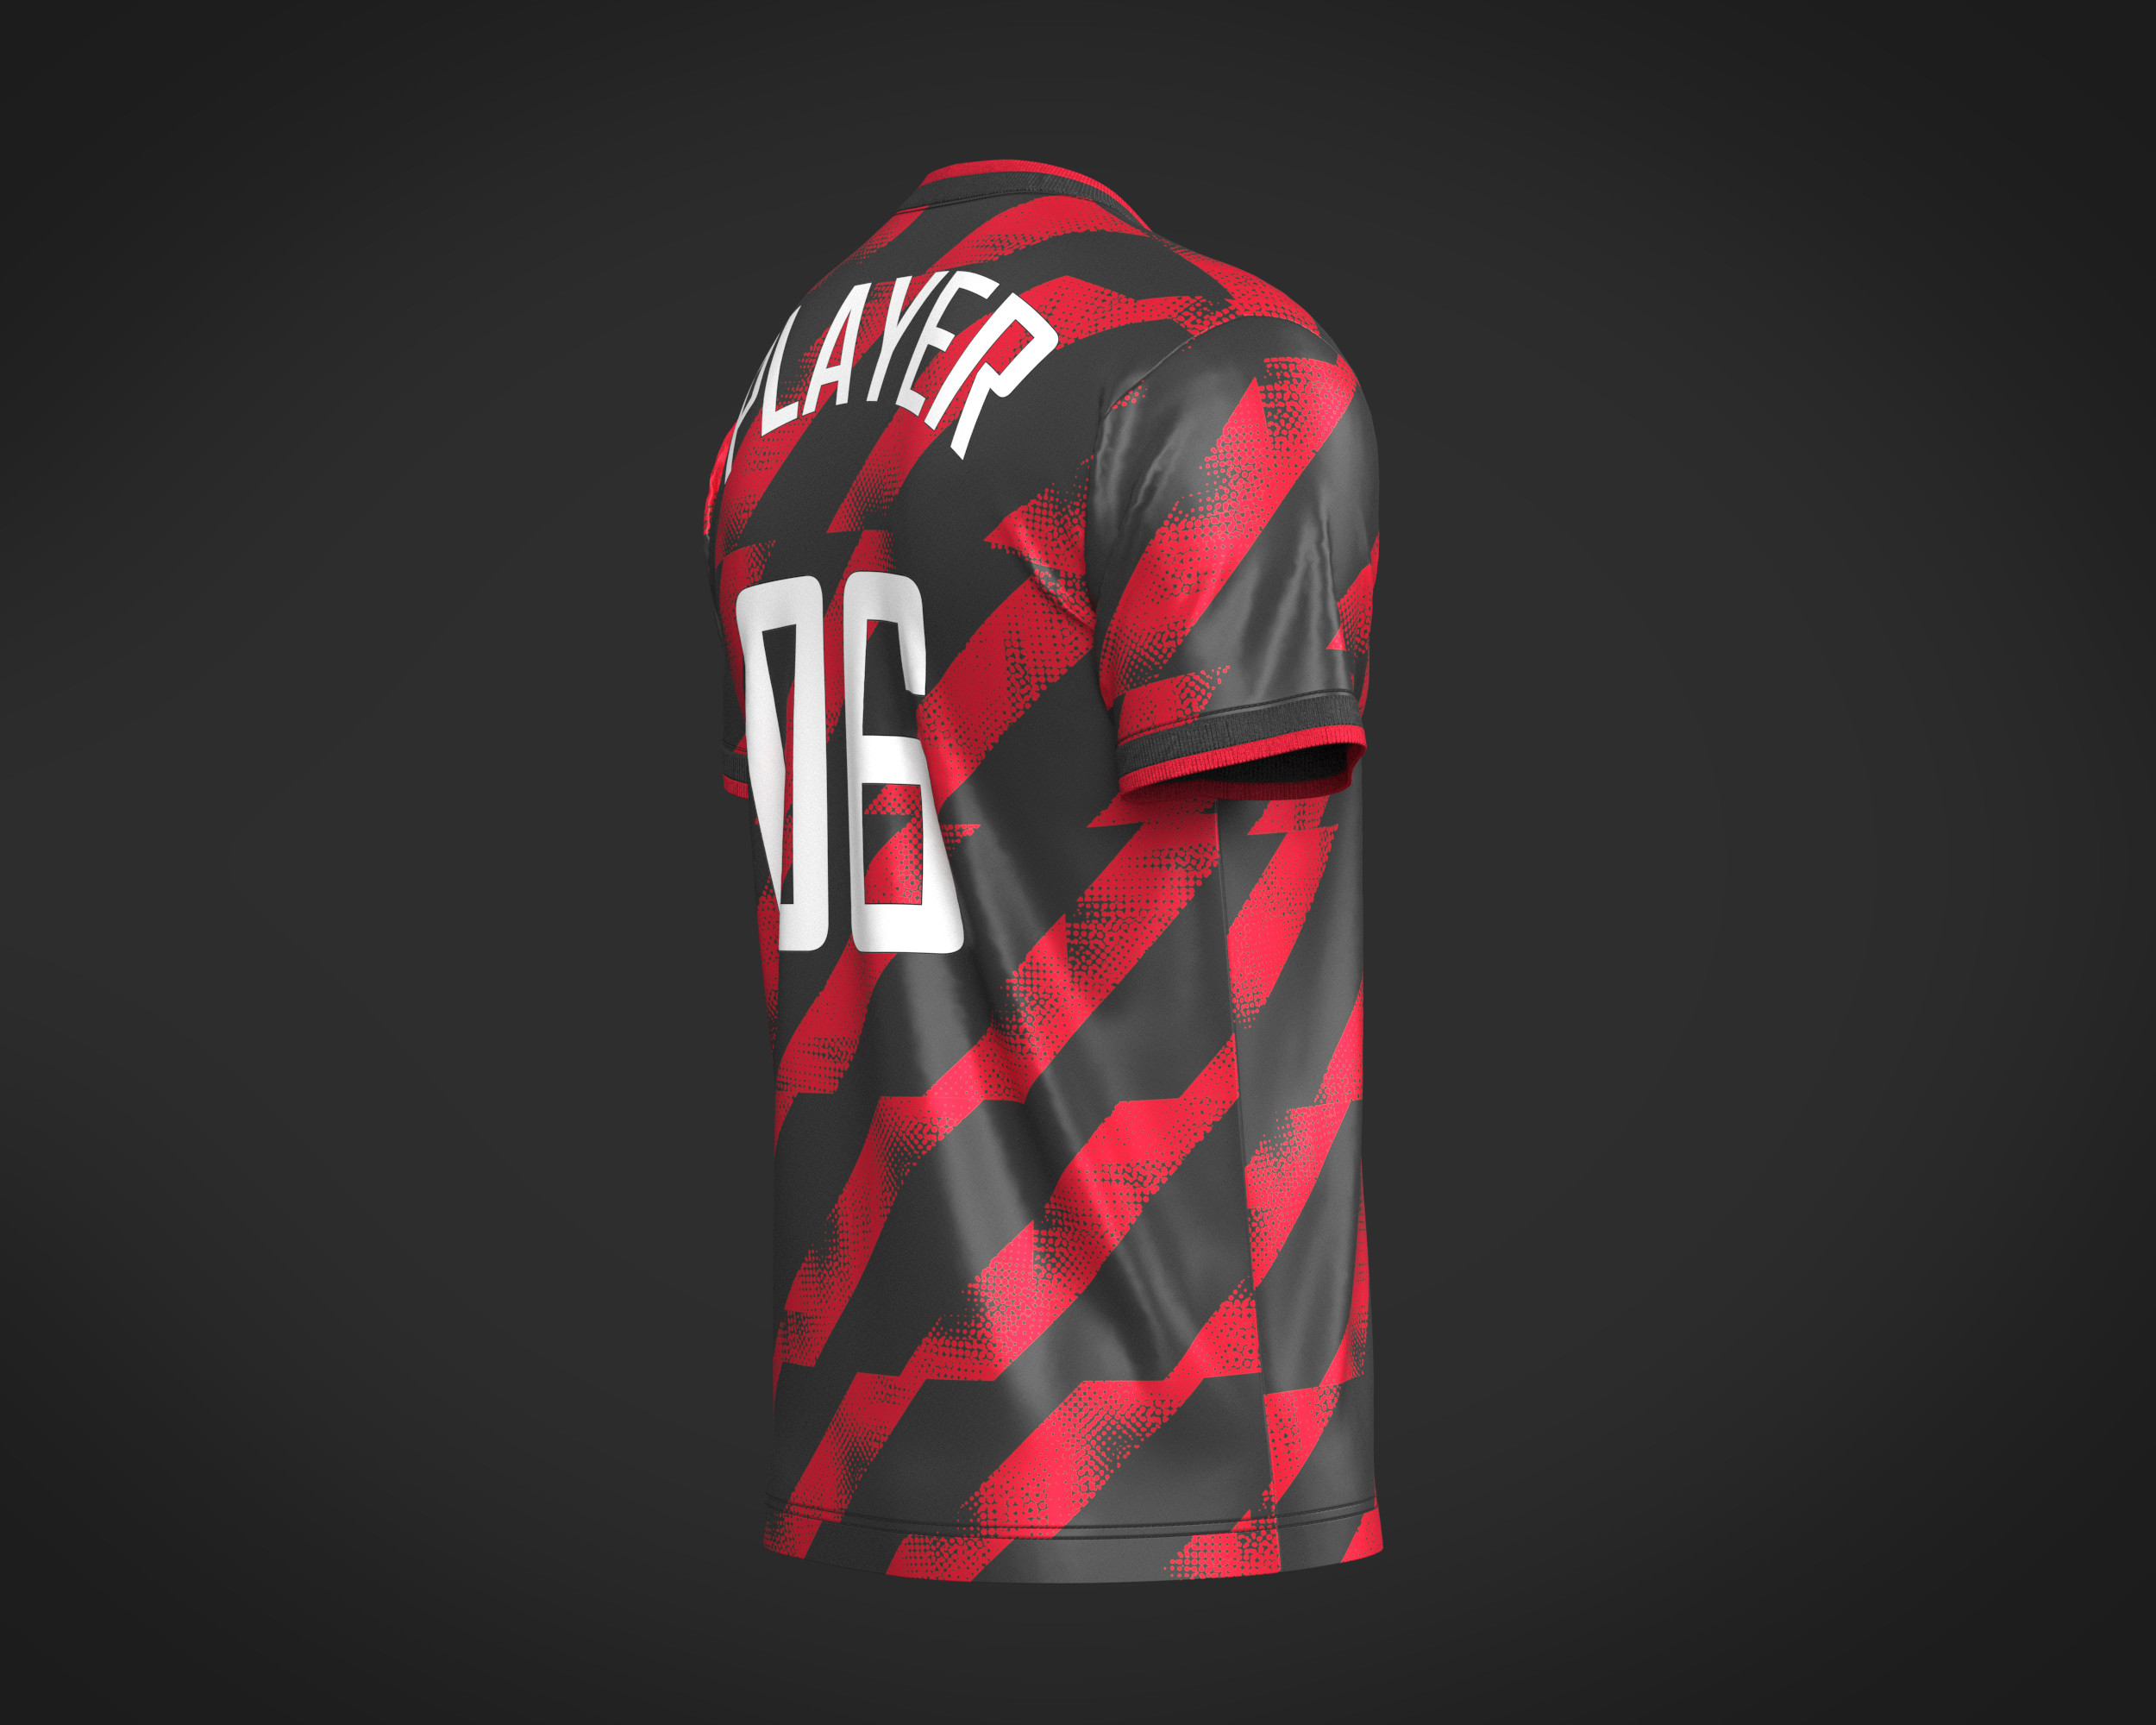 3D Soccer Football Red color Jersey Player-11 - TurboSquid 2037703